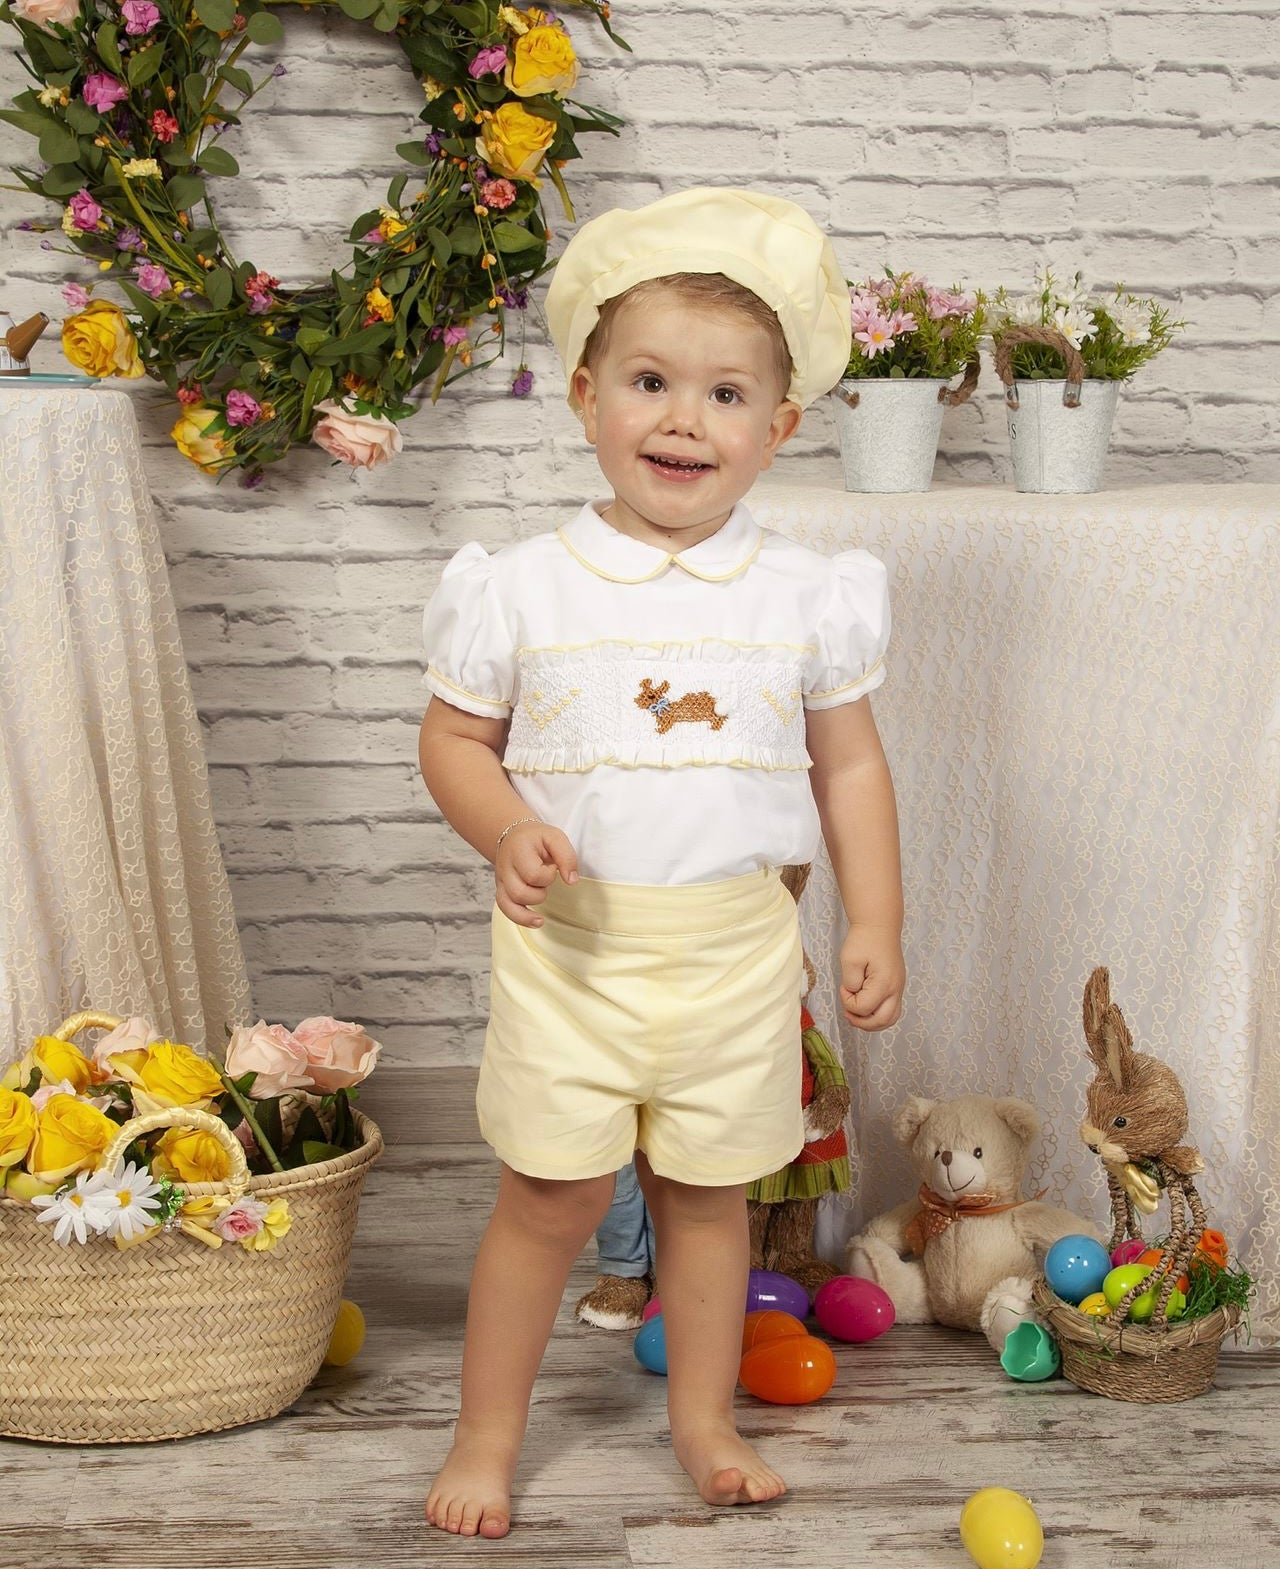 PC23-01 Boys Easter smock outfit